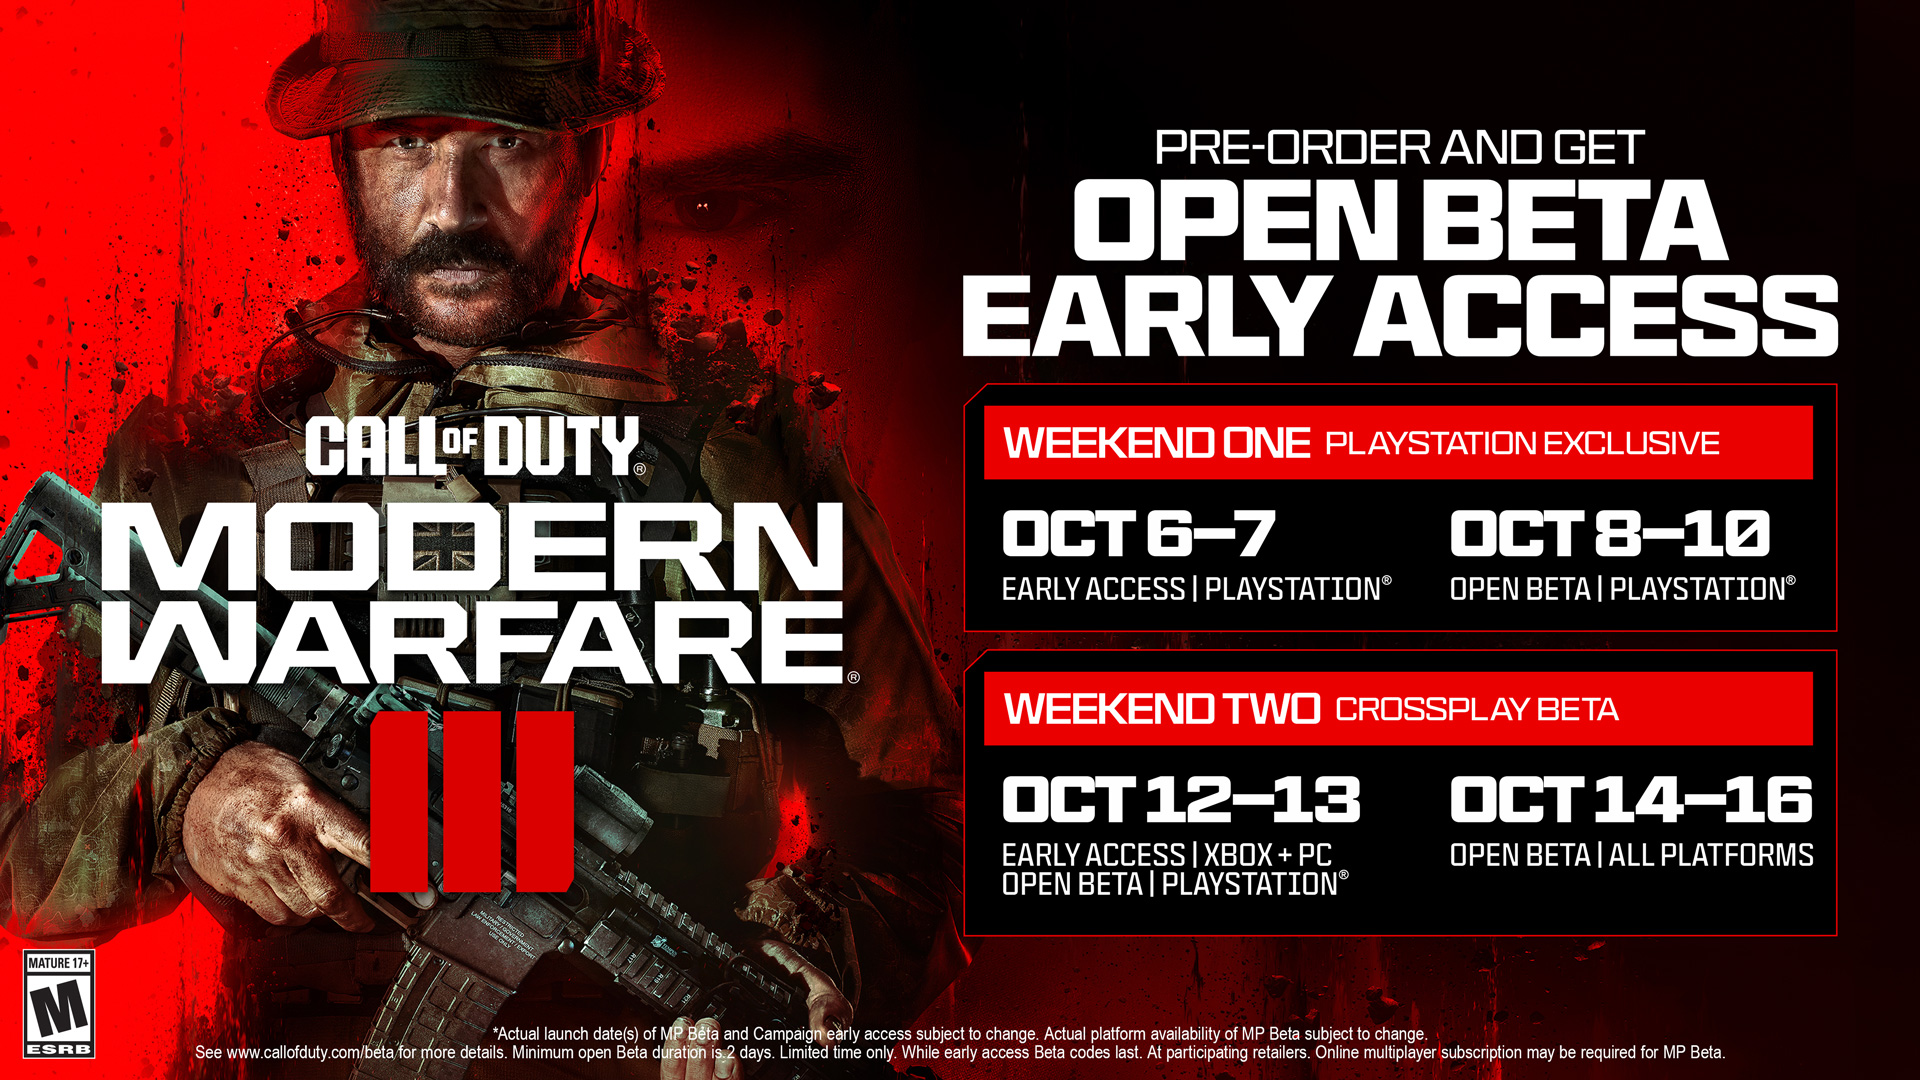 When is the Modern Warfare 3 open beta? Release date and start time